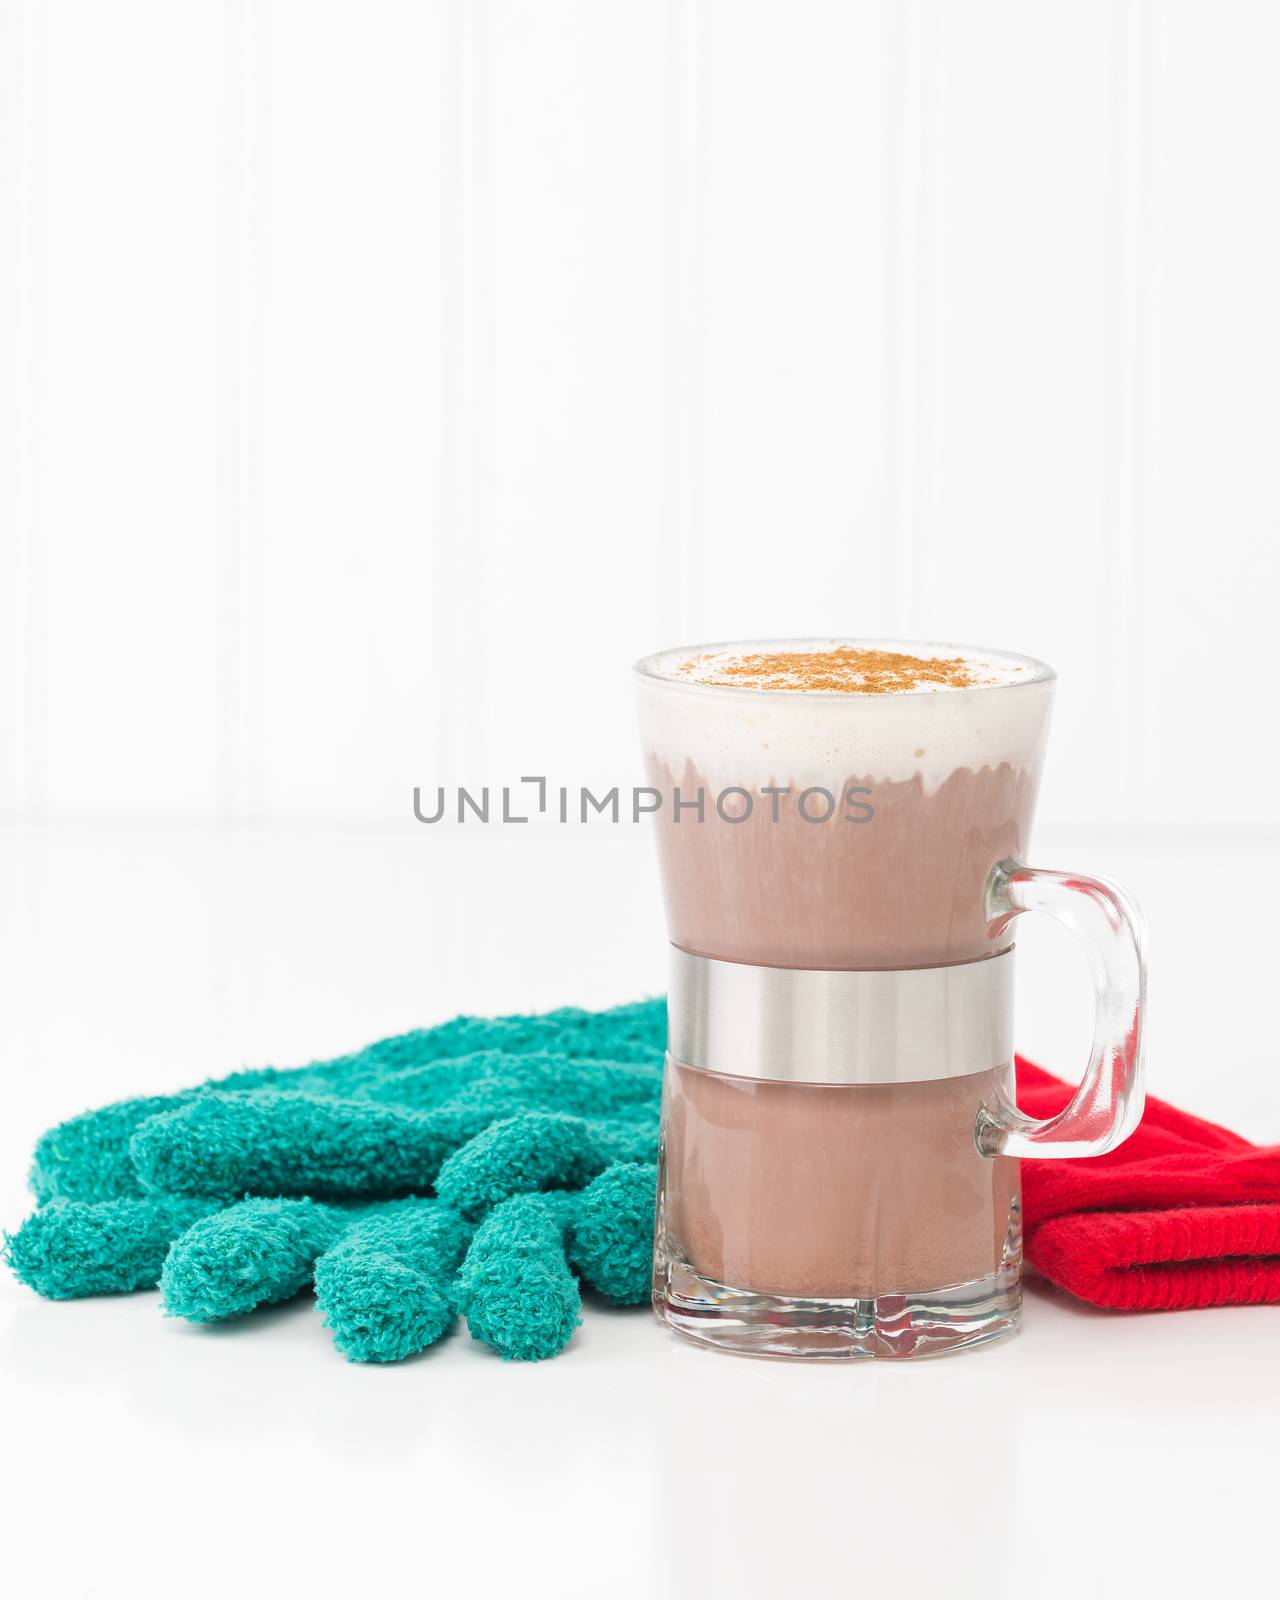 Creamy Hot Chocolate Portrait by billberryphotography